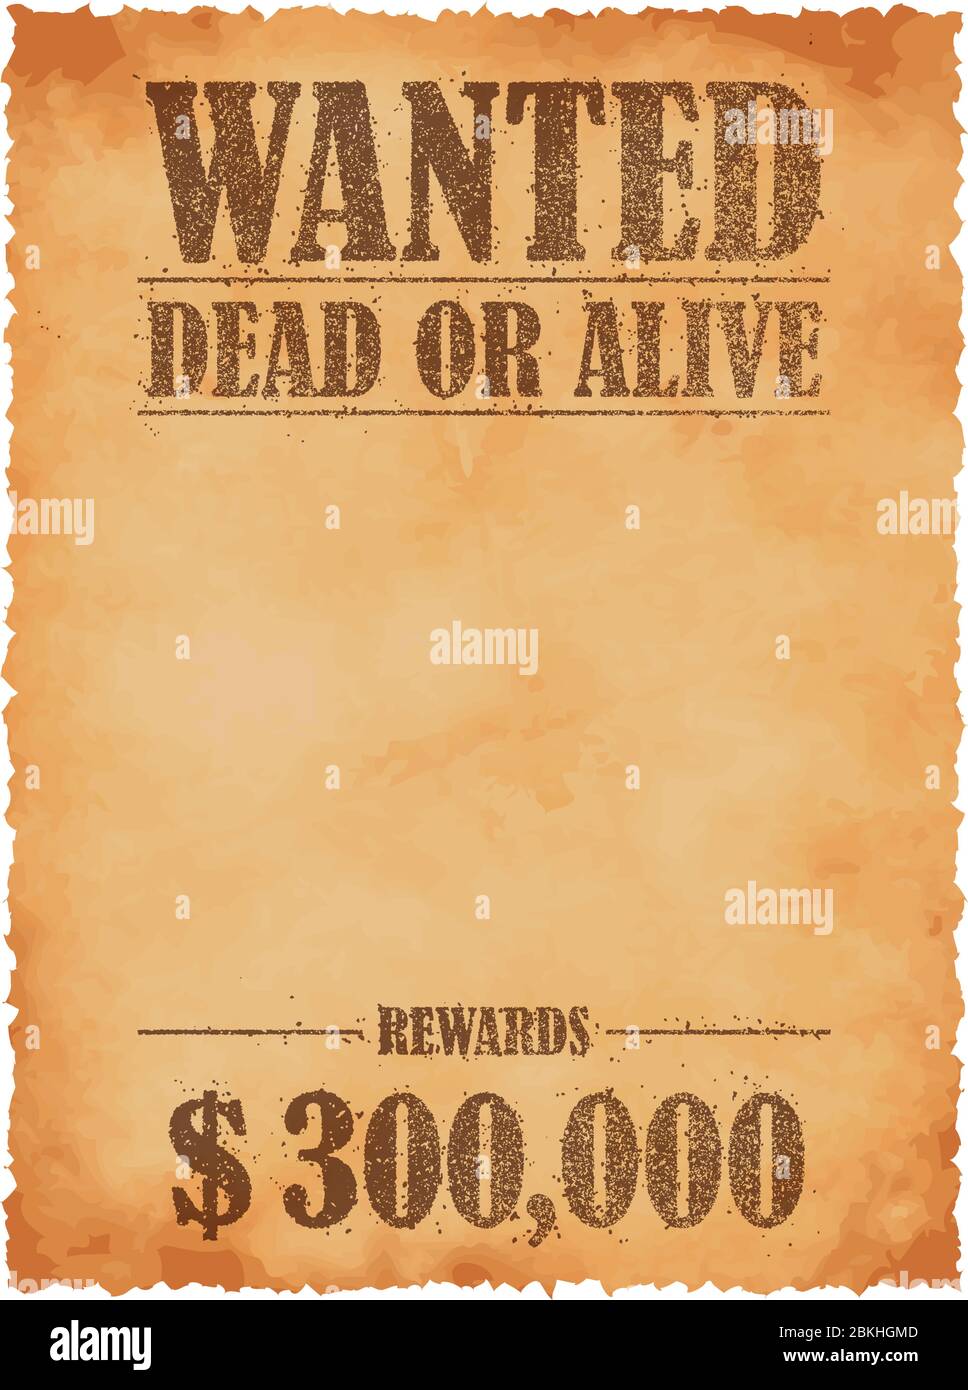 1920S Wanted Poster Template from c8.alamy.com